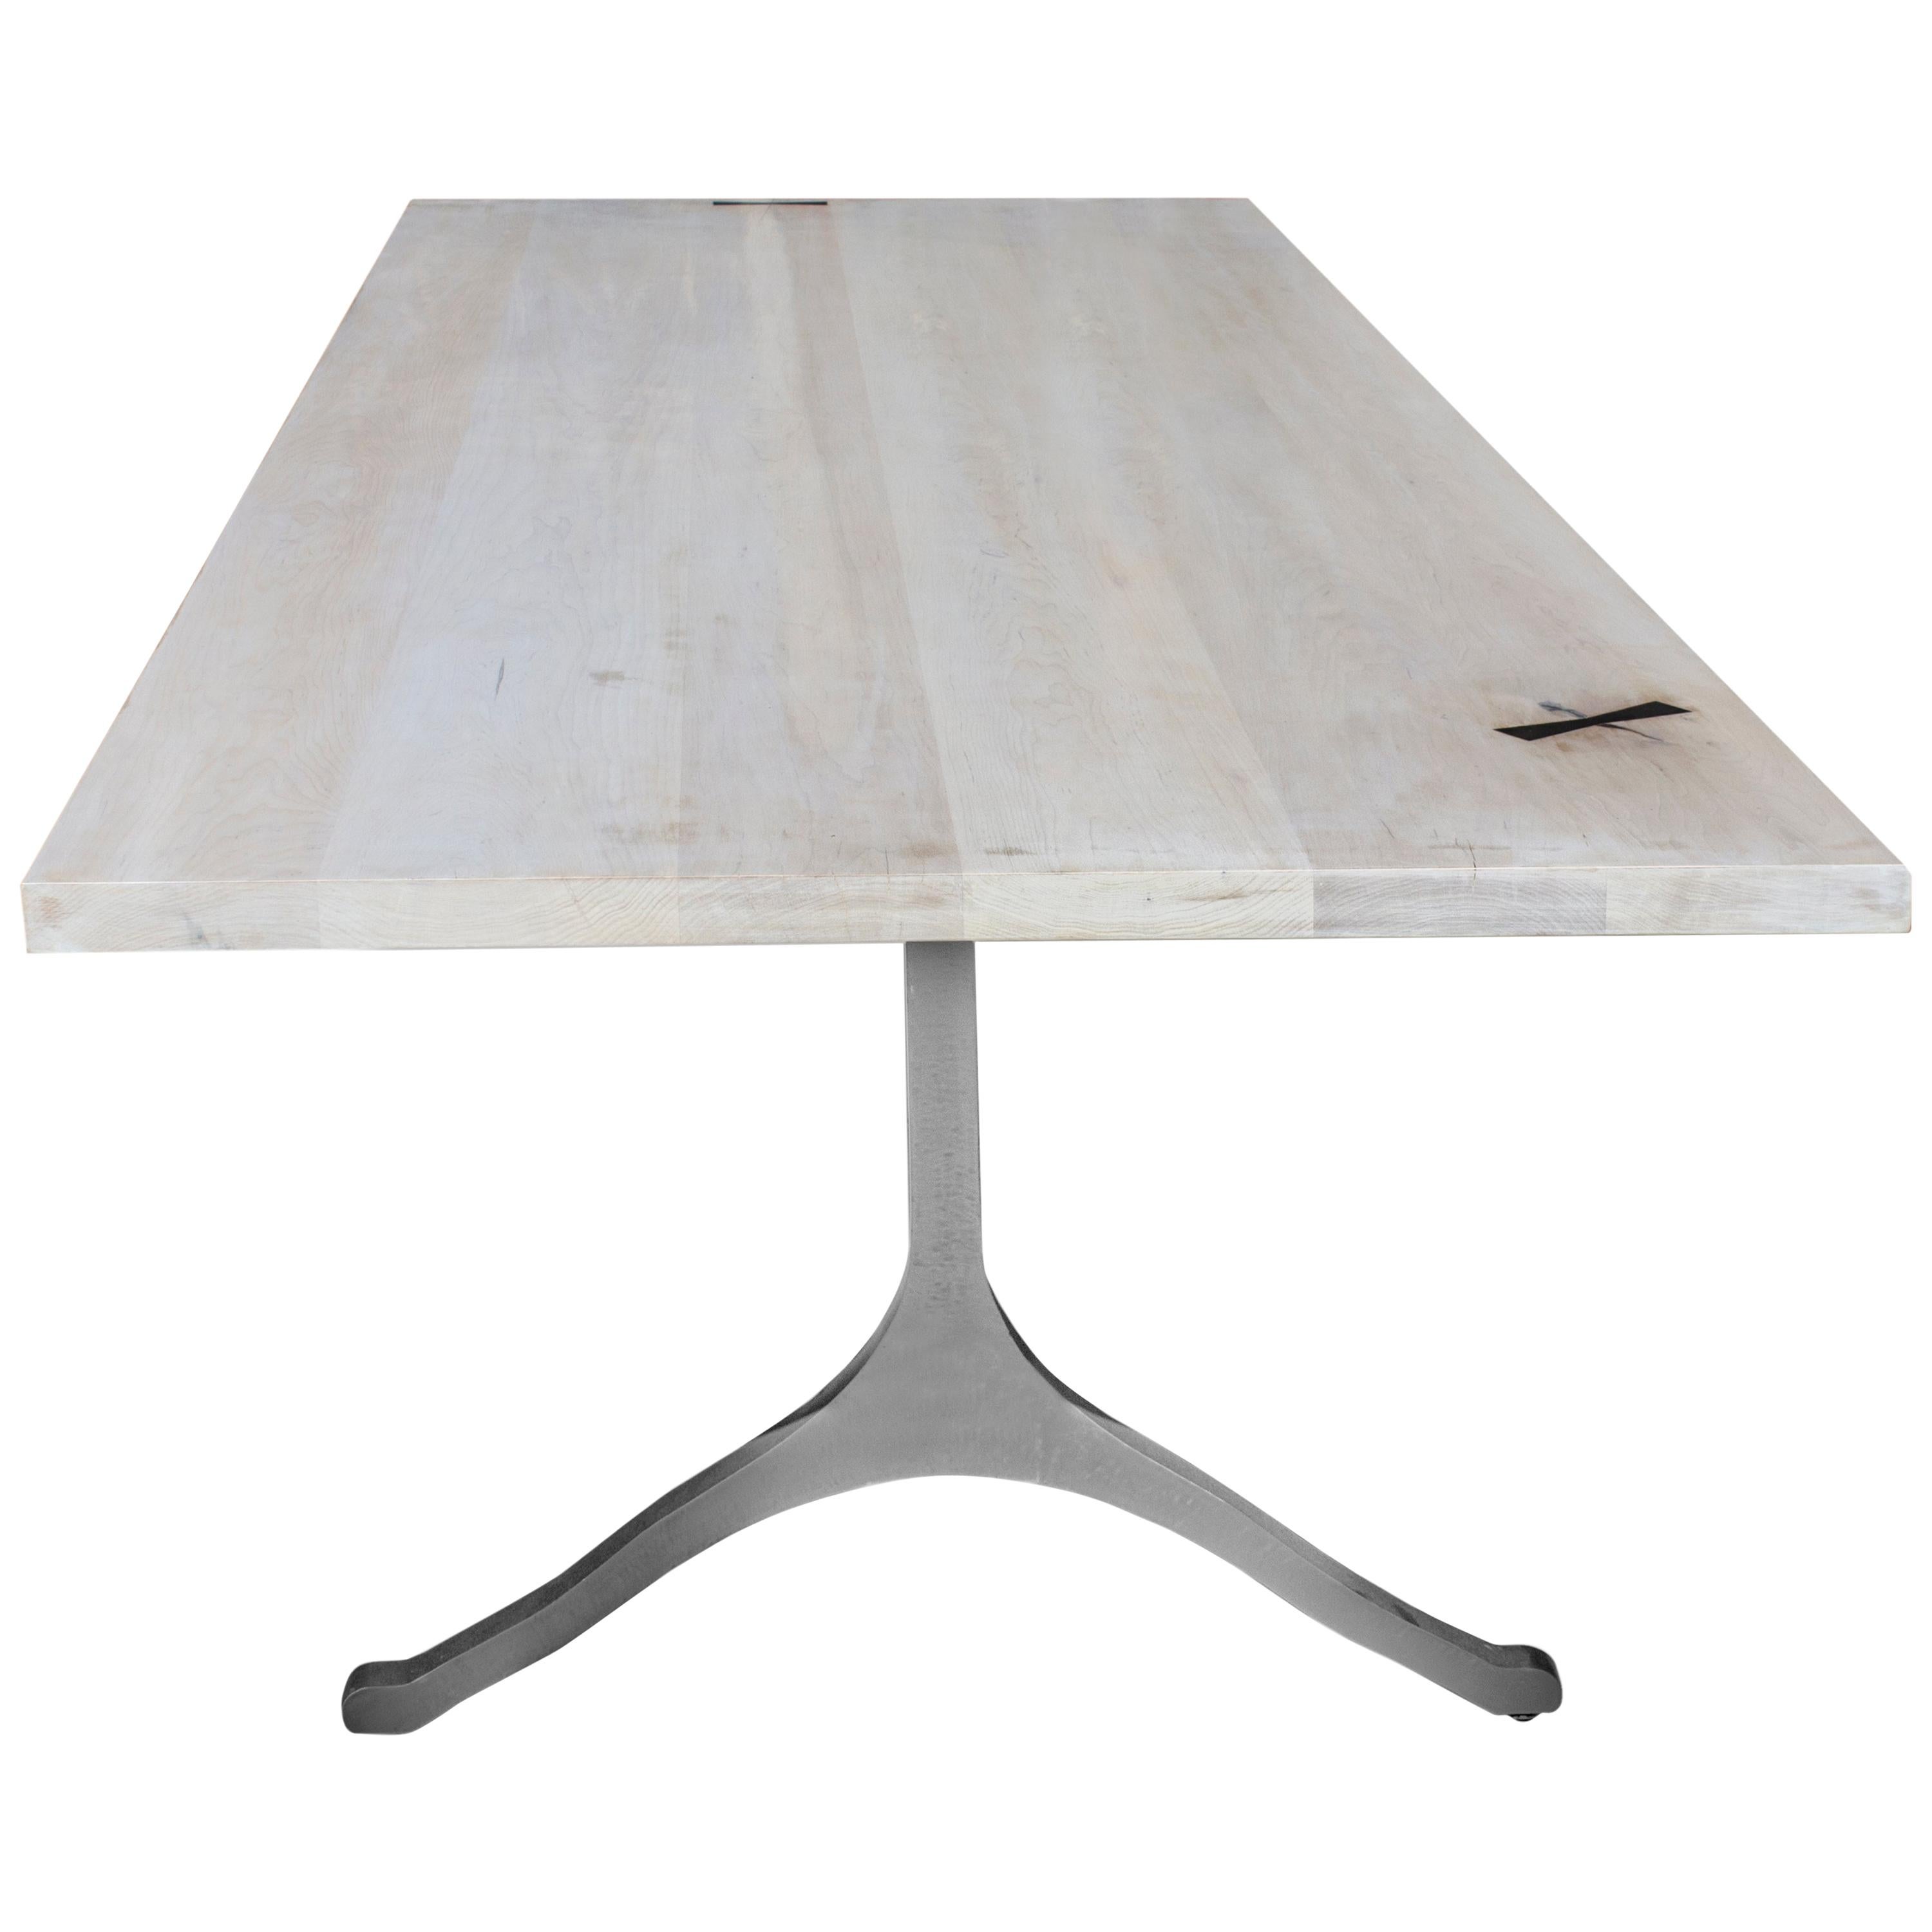 White Washed Maple Wishbone Table by Mark Jupiter For Sale